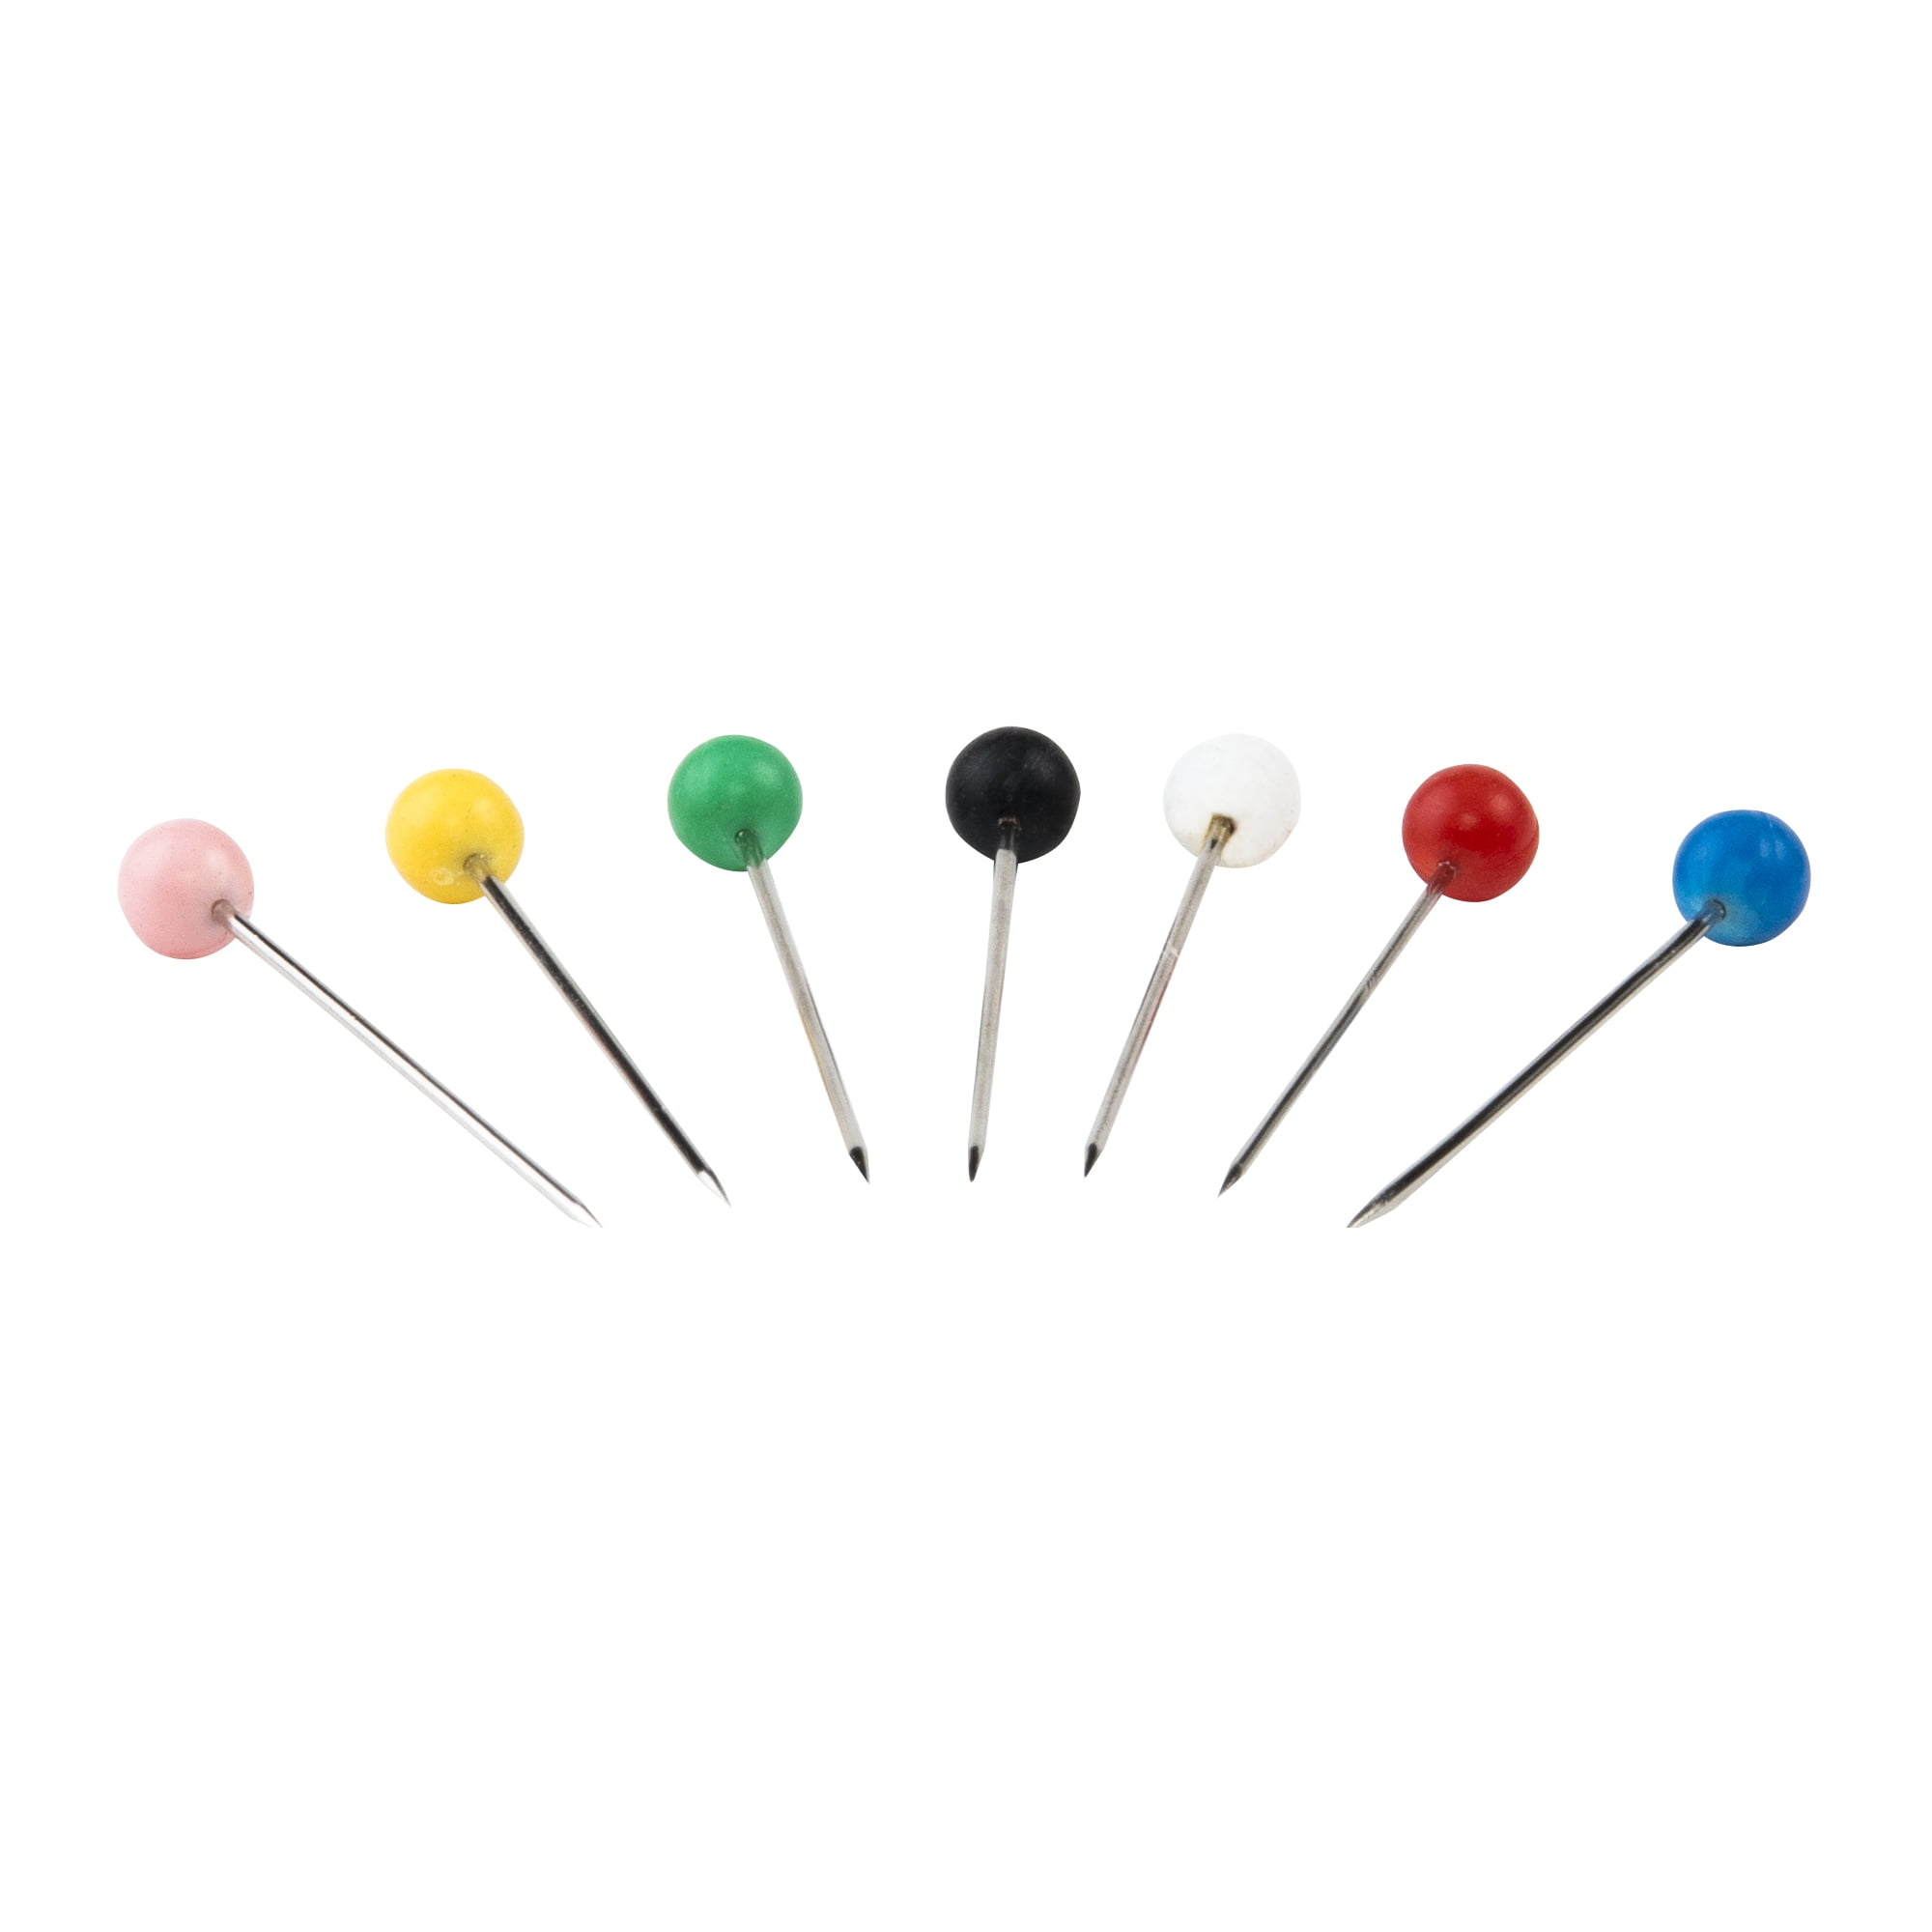 Stainless Steel Metal Round Head Fruit Needle - GDJJ723 - IdeaStage  Promotional Products